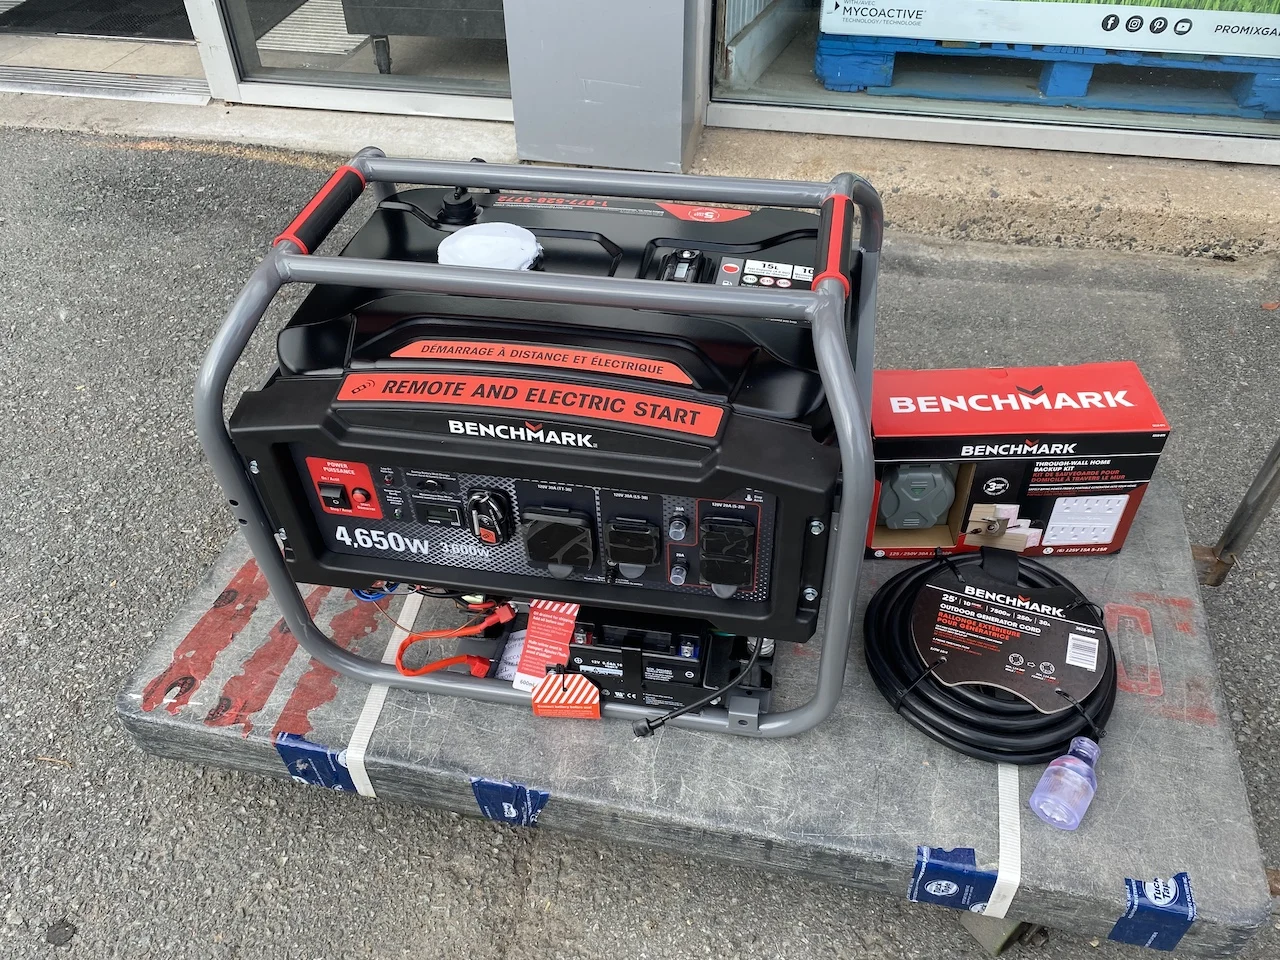 How you can avoid harm while using a generator